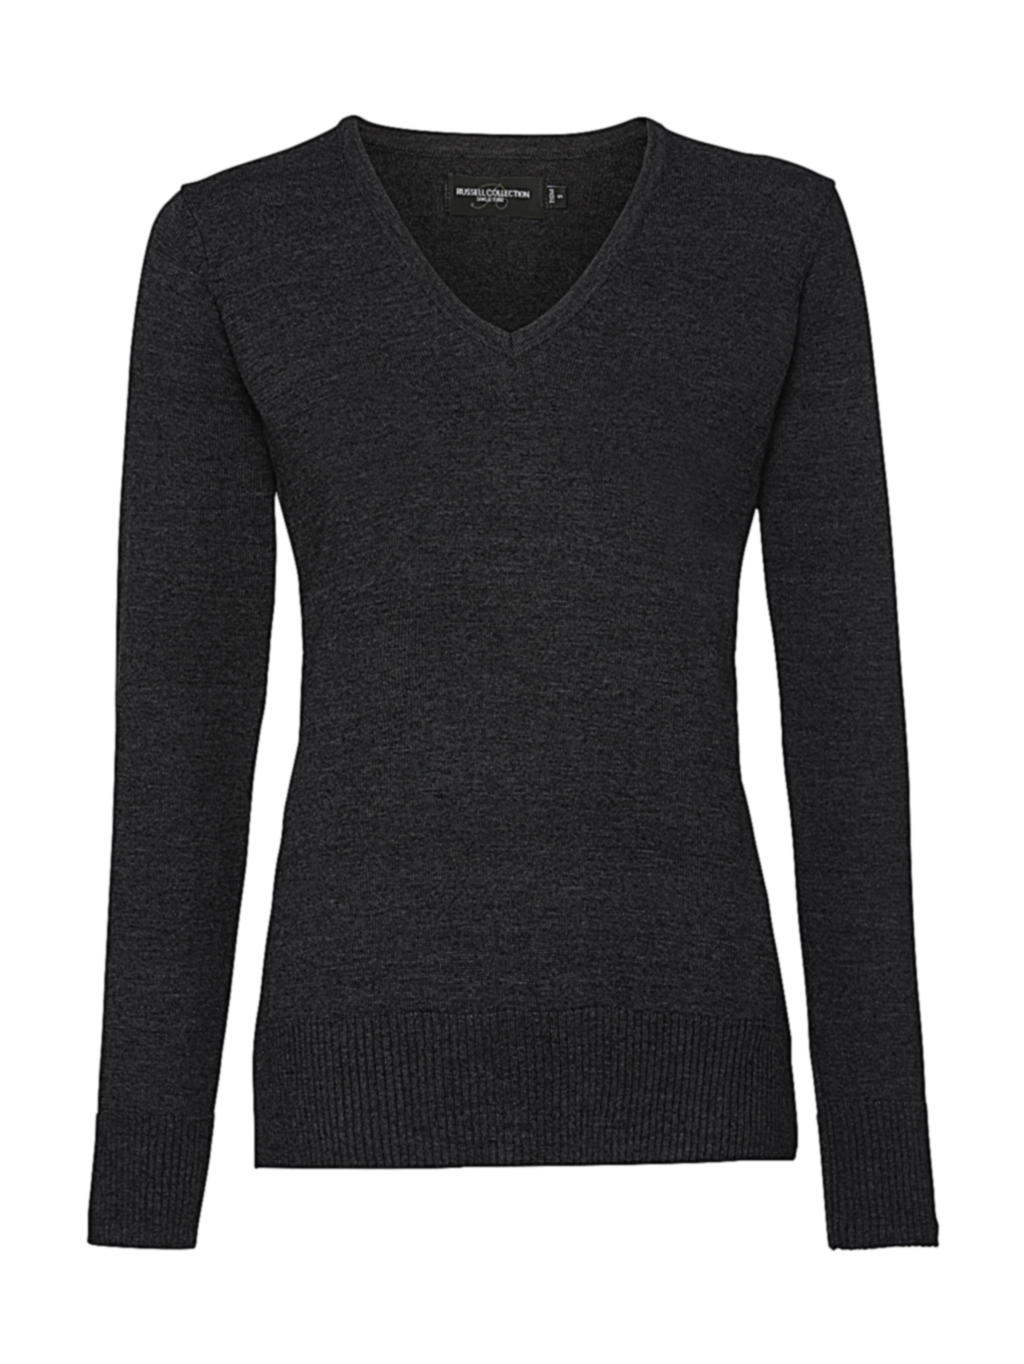  Ladies? V-Neck Knitted Pullover in Farbe Charcoal Marl